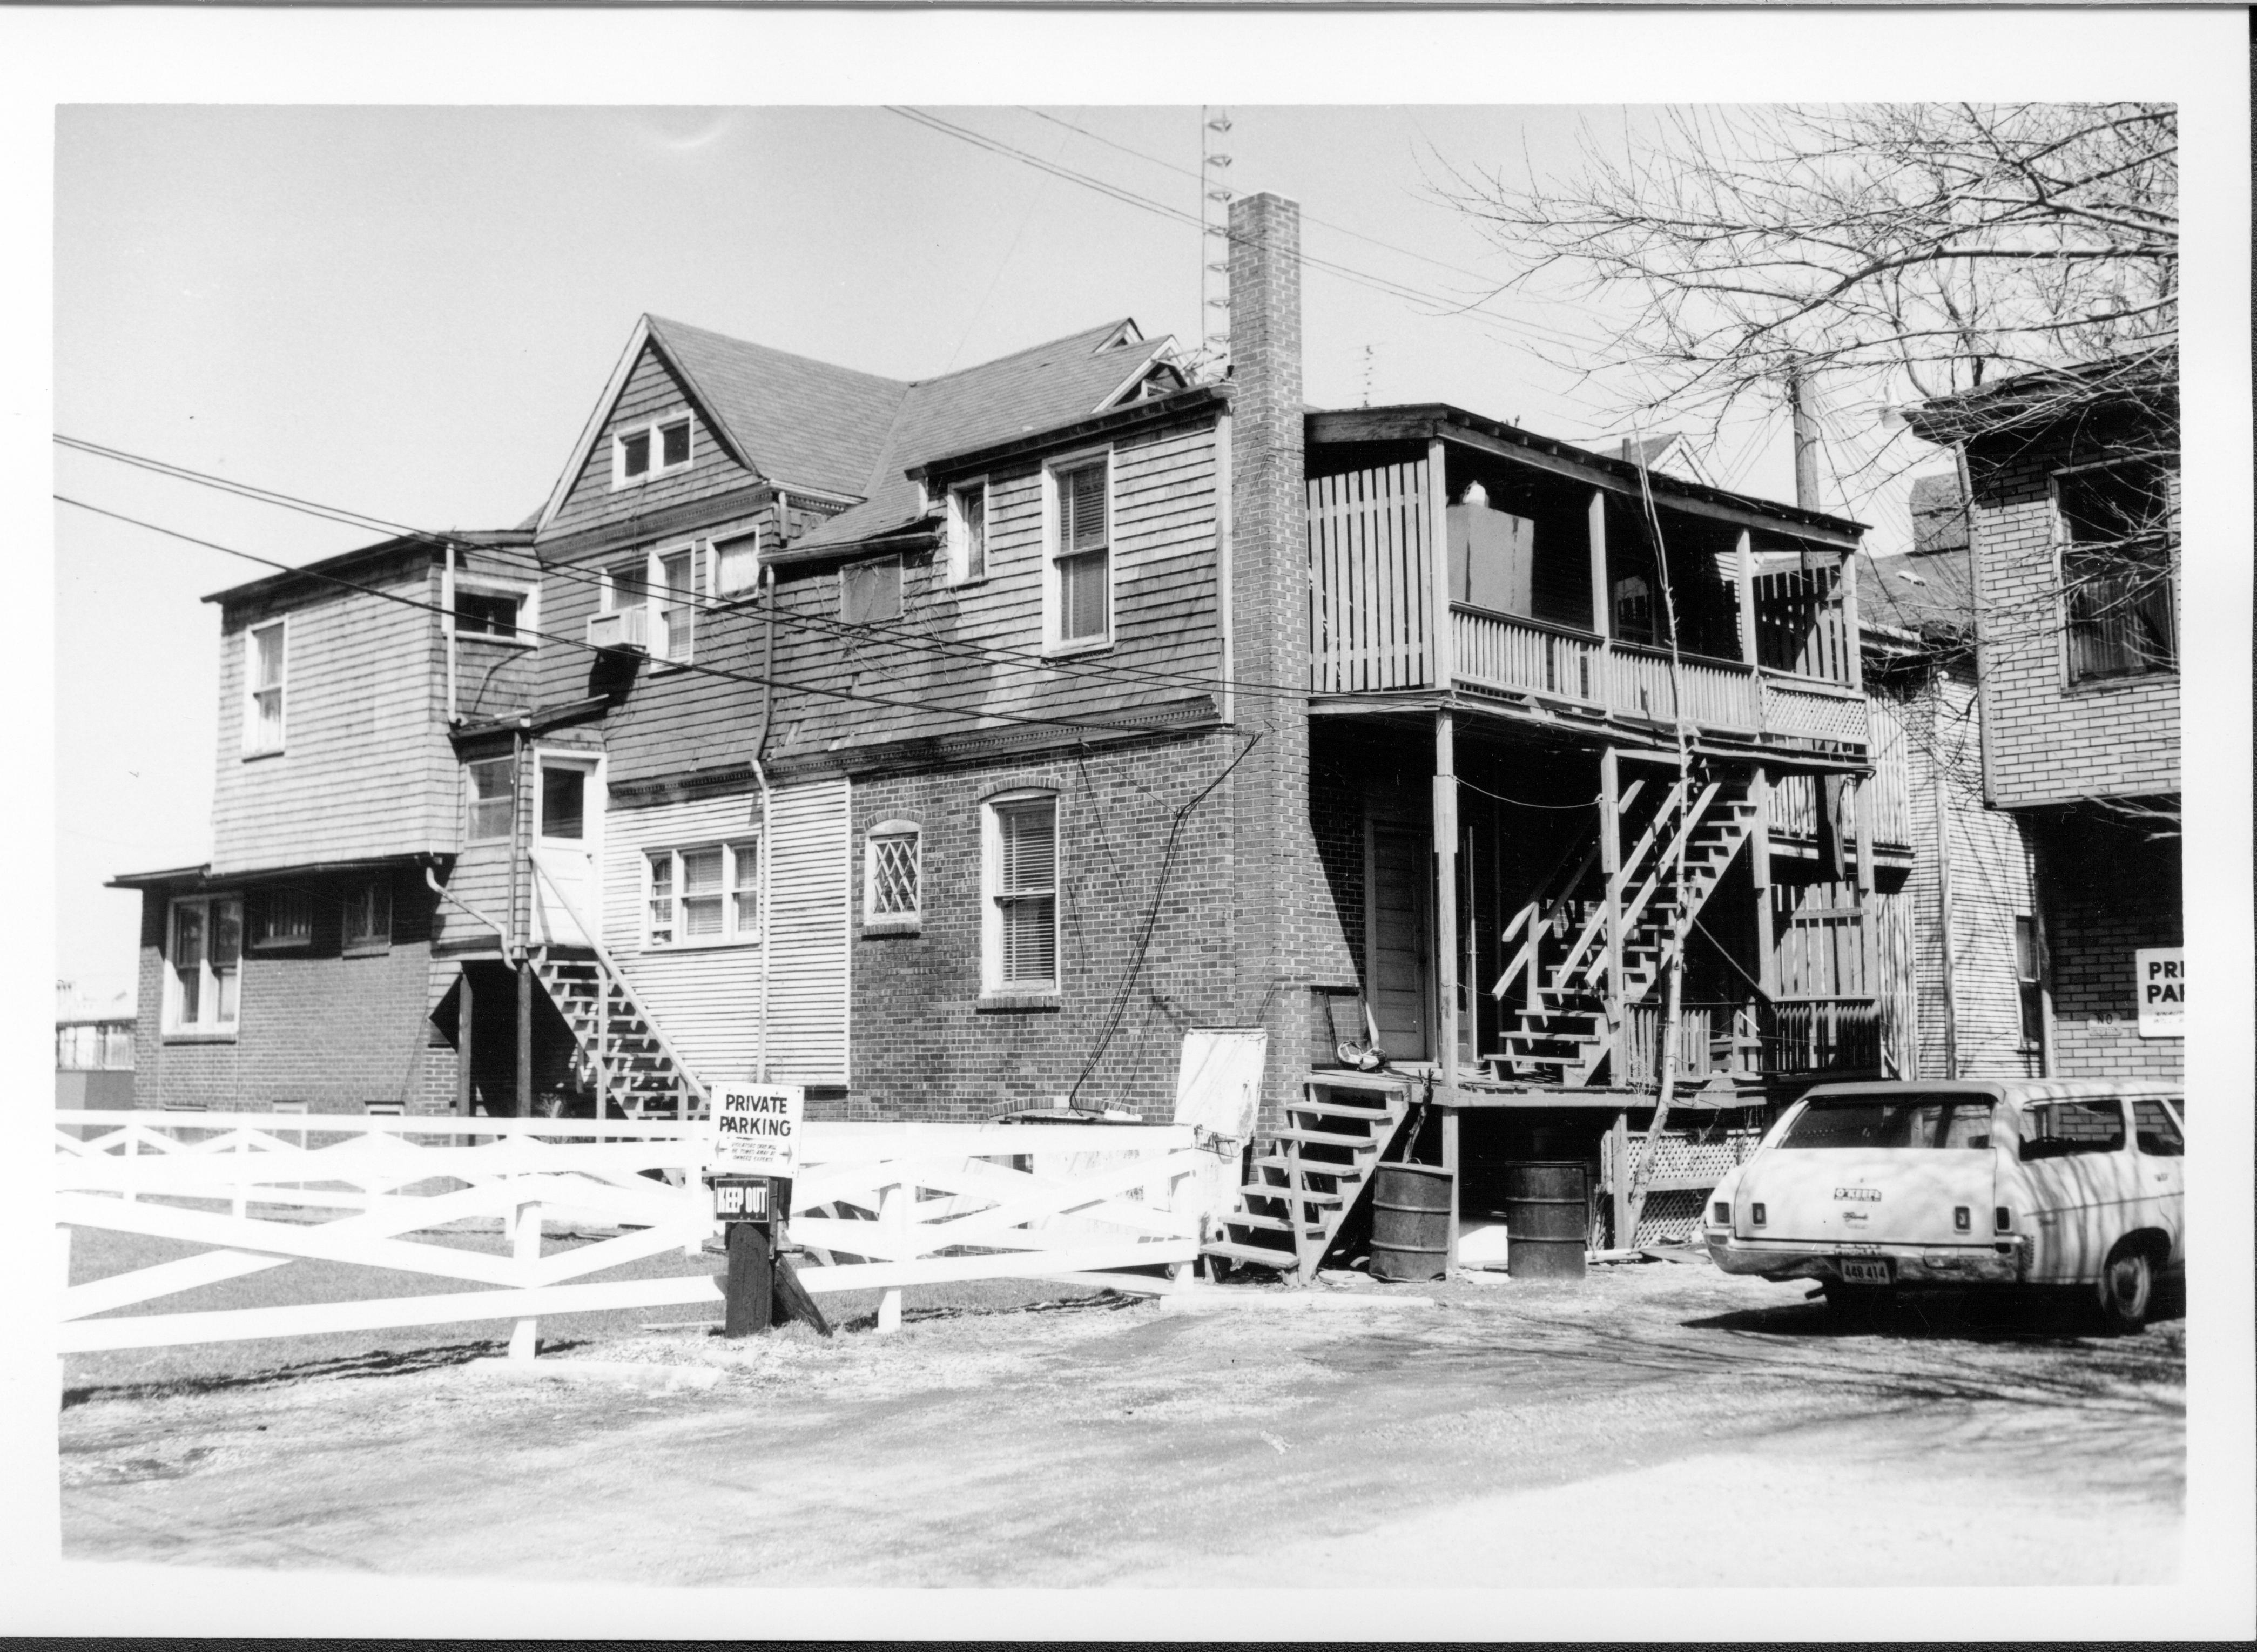 House owned by Bernard W. Bowman in use as apartments, Block 7, Lots 16 & 17 facing Capitol Ave. Beedle house is at far right in front of station wagon.  Area is now empty Walters lot. Looking Northeast from alley Bowman, Beedle, Capitol Ave., Walters lot